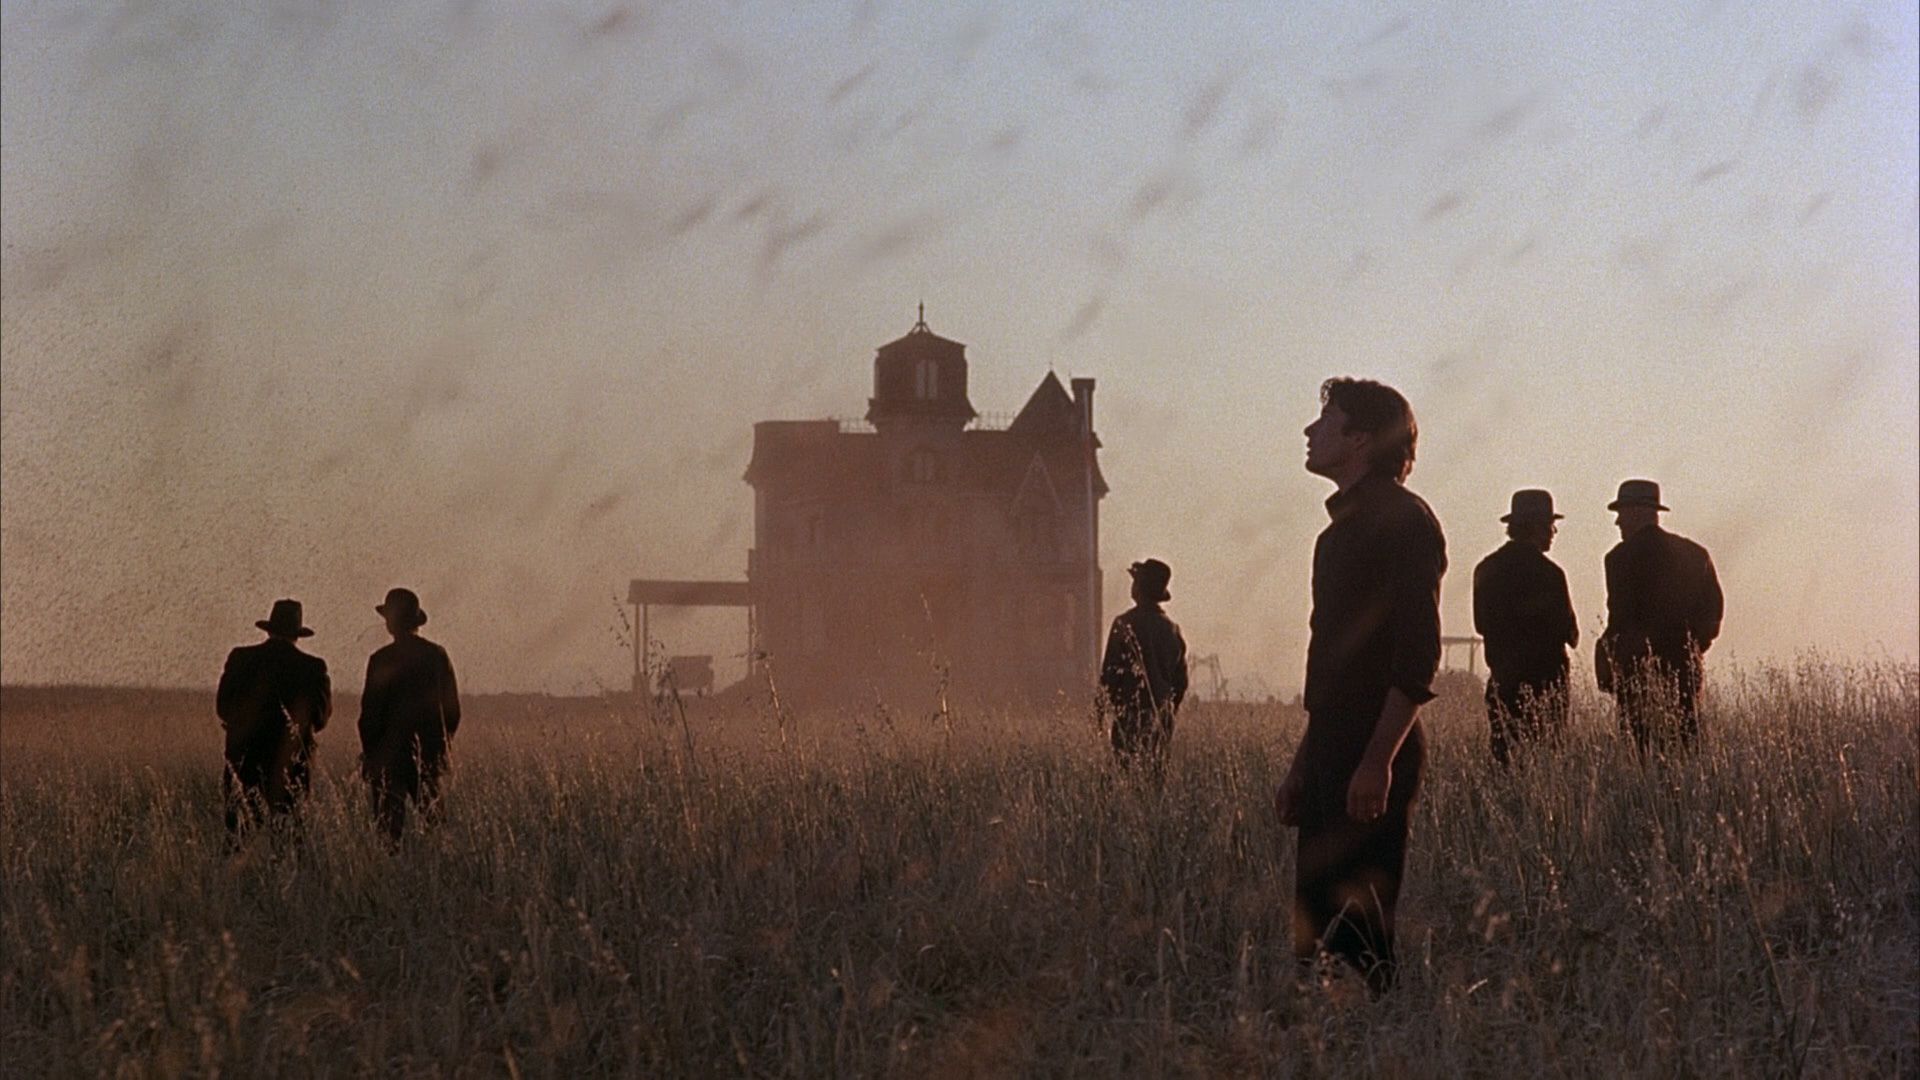 Essential viewing: Malick's 'Days of Heaven' remains a vision of light